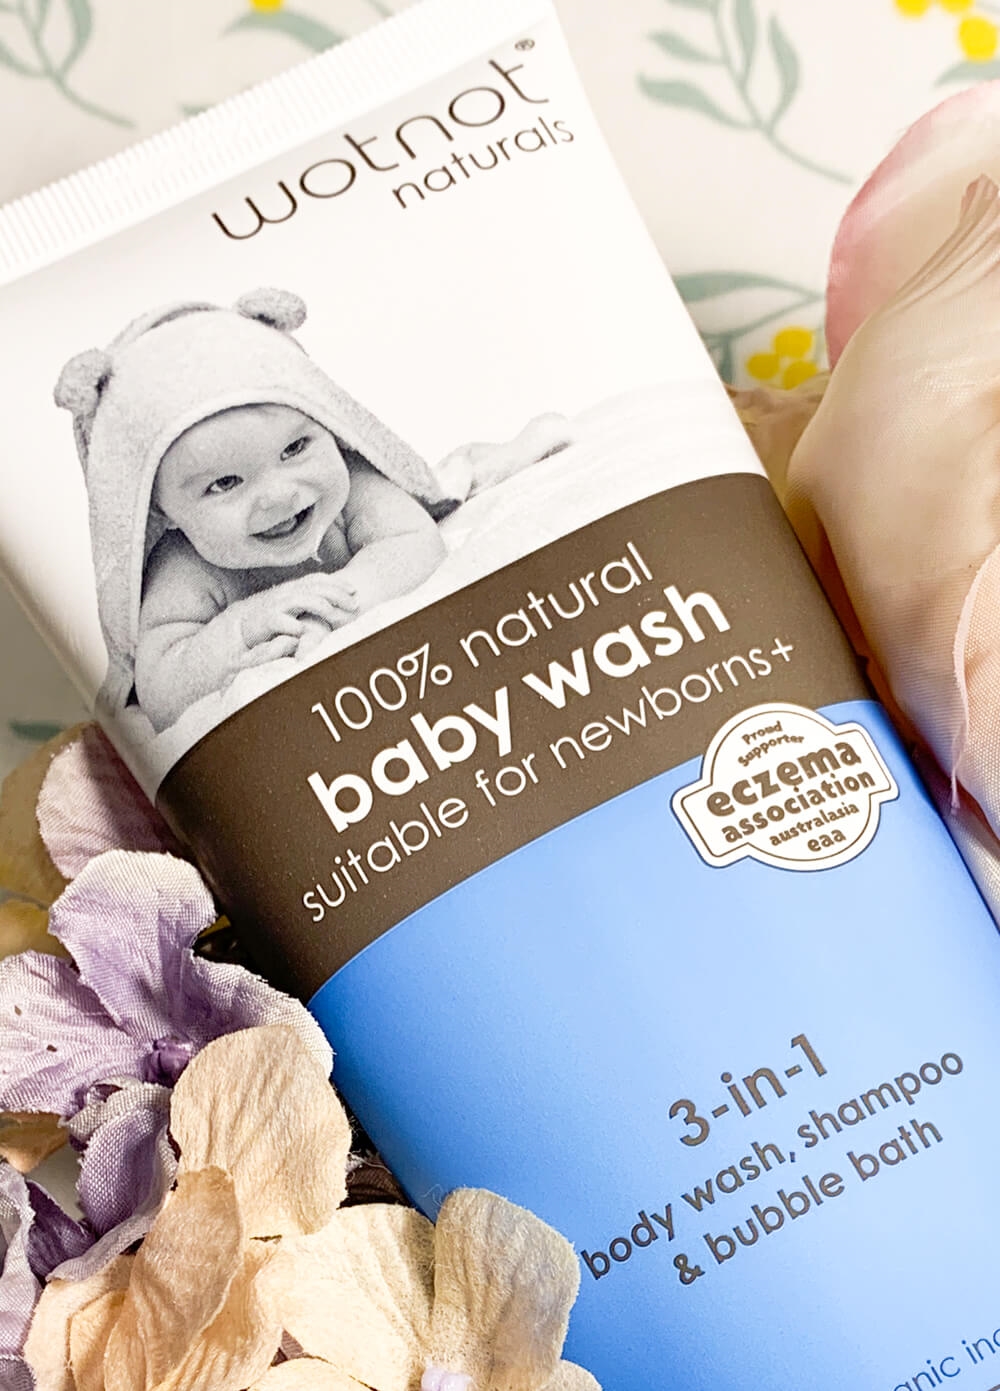 Wotnot - 100% Natural 3-in-1 Baby Wash, Shampoo and Bubble Bath